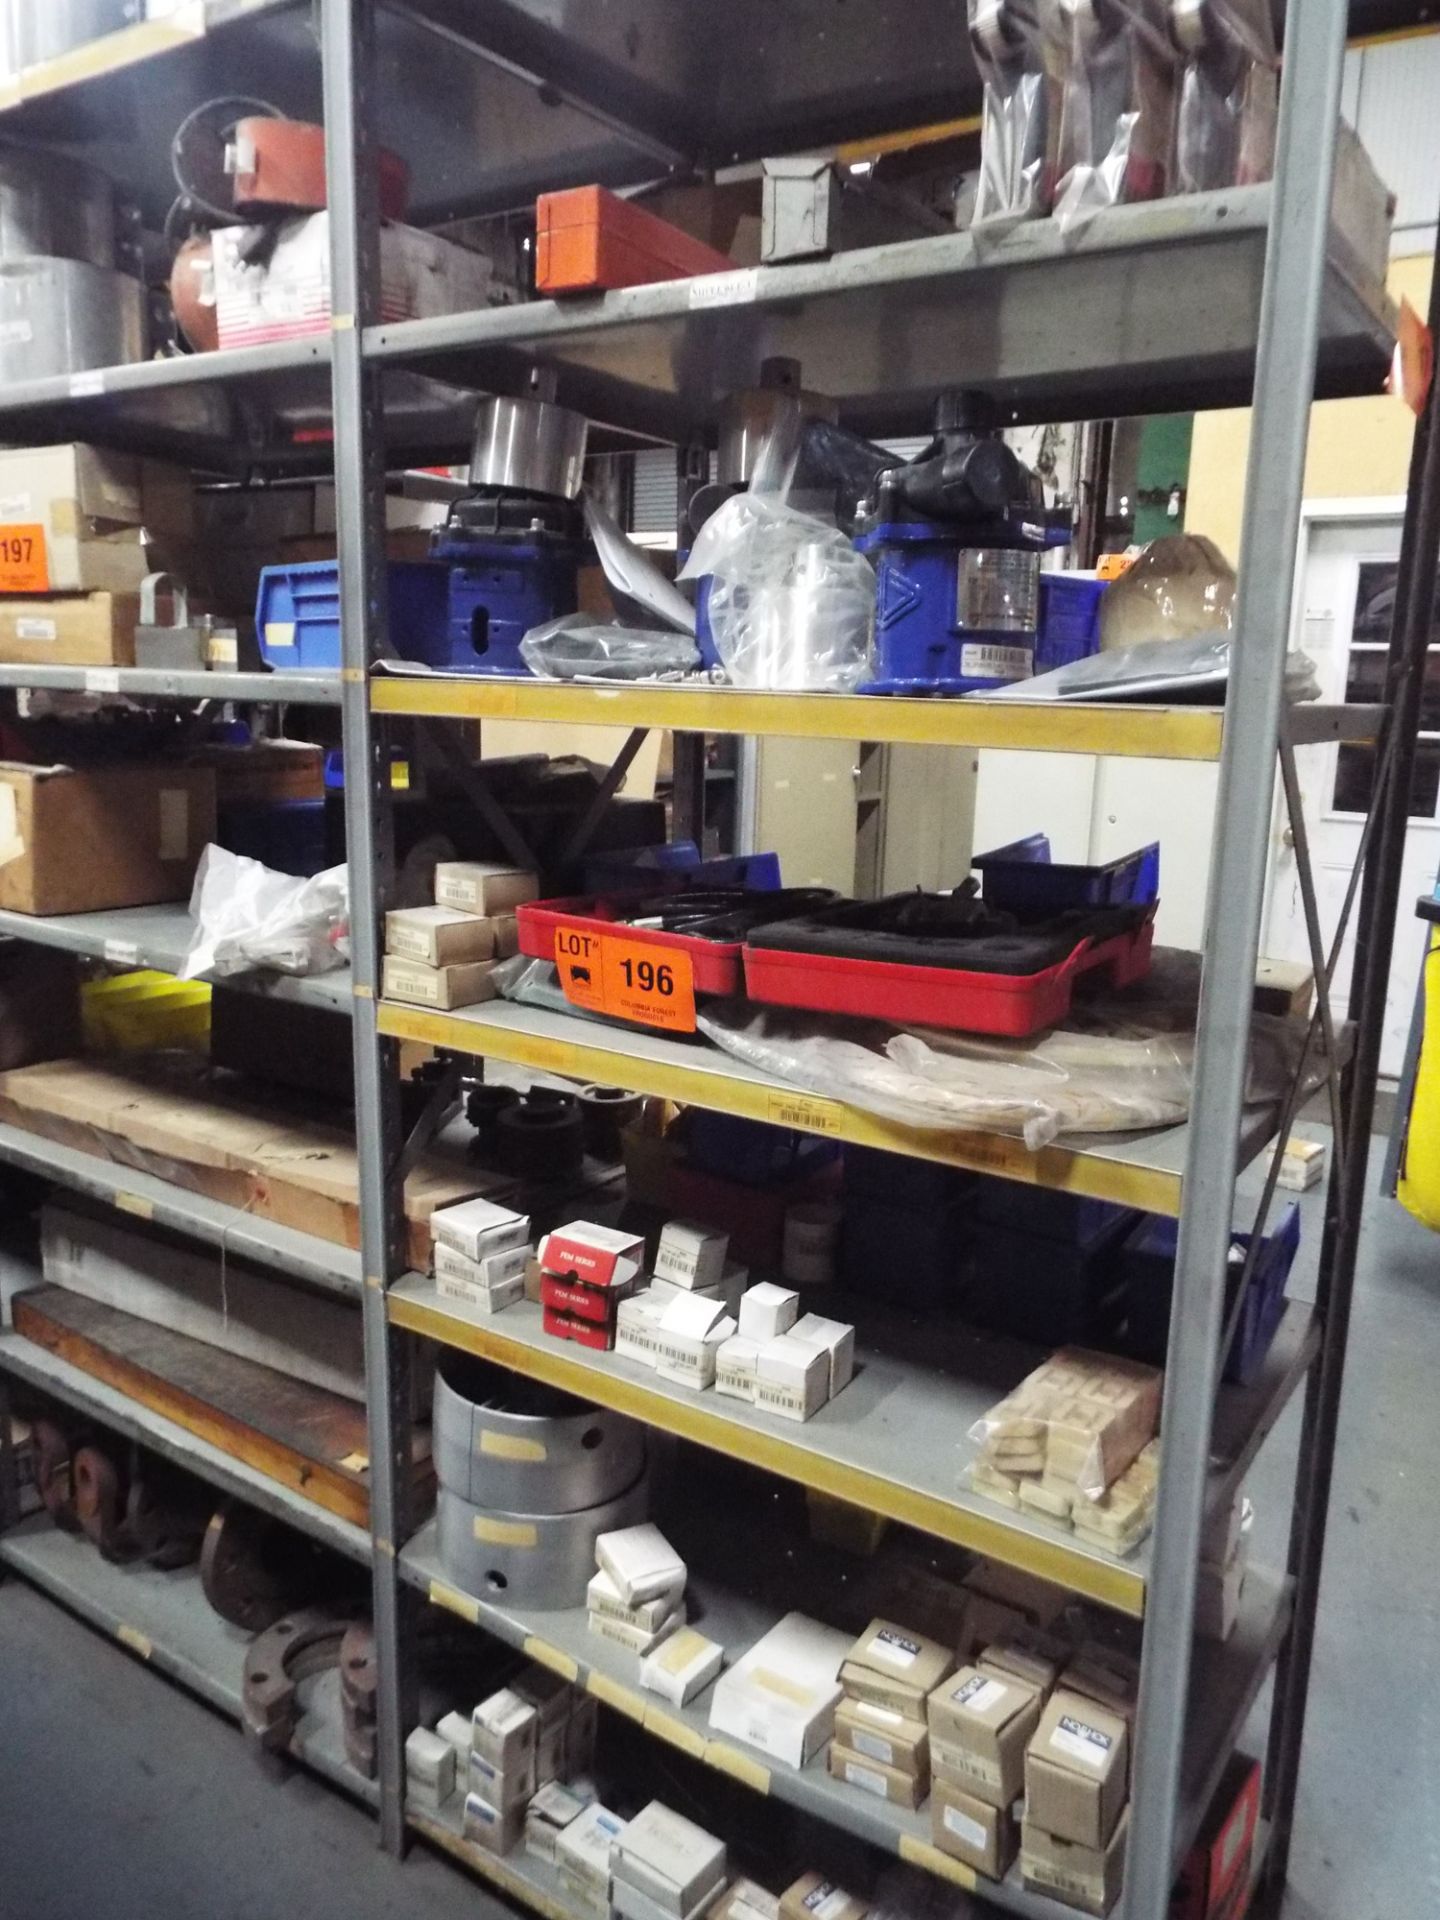 LOT/ CONTENTS OF SHELF - INCLUDING BUT NOT LIMITED TO GAUGES, GRINDERS, PVC PIPE FITTINGS AND